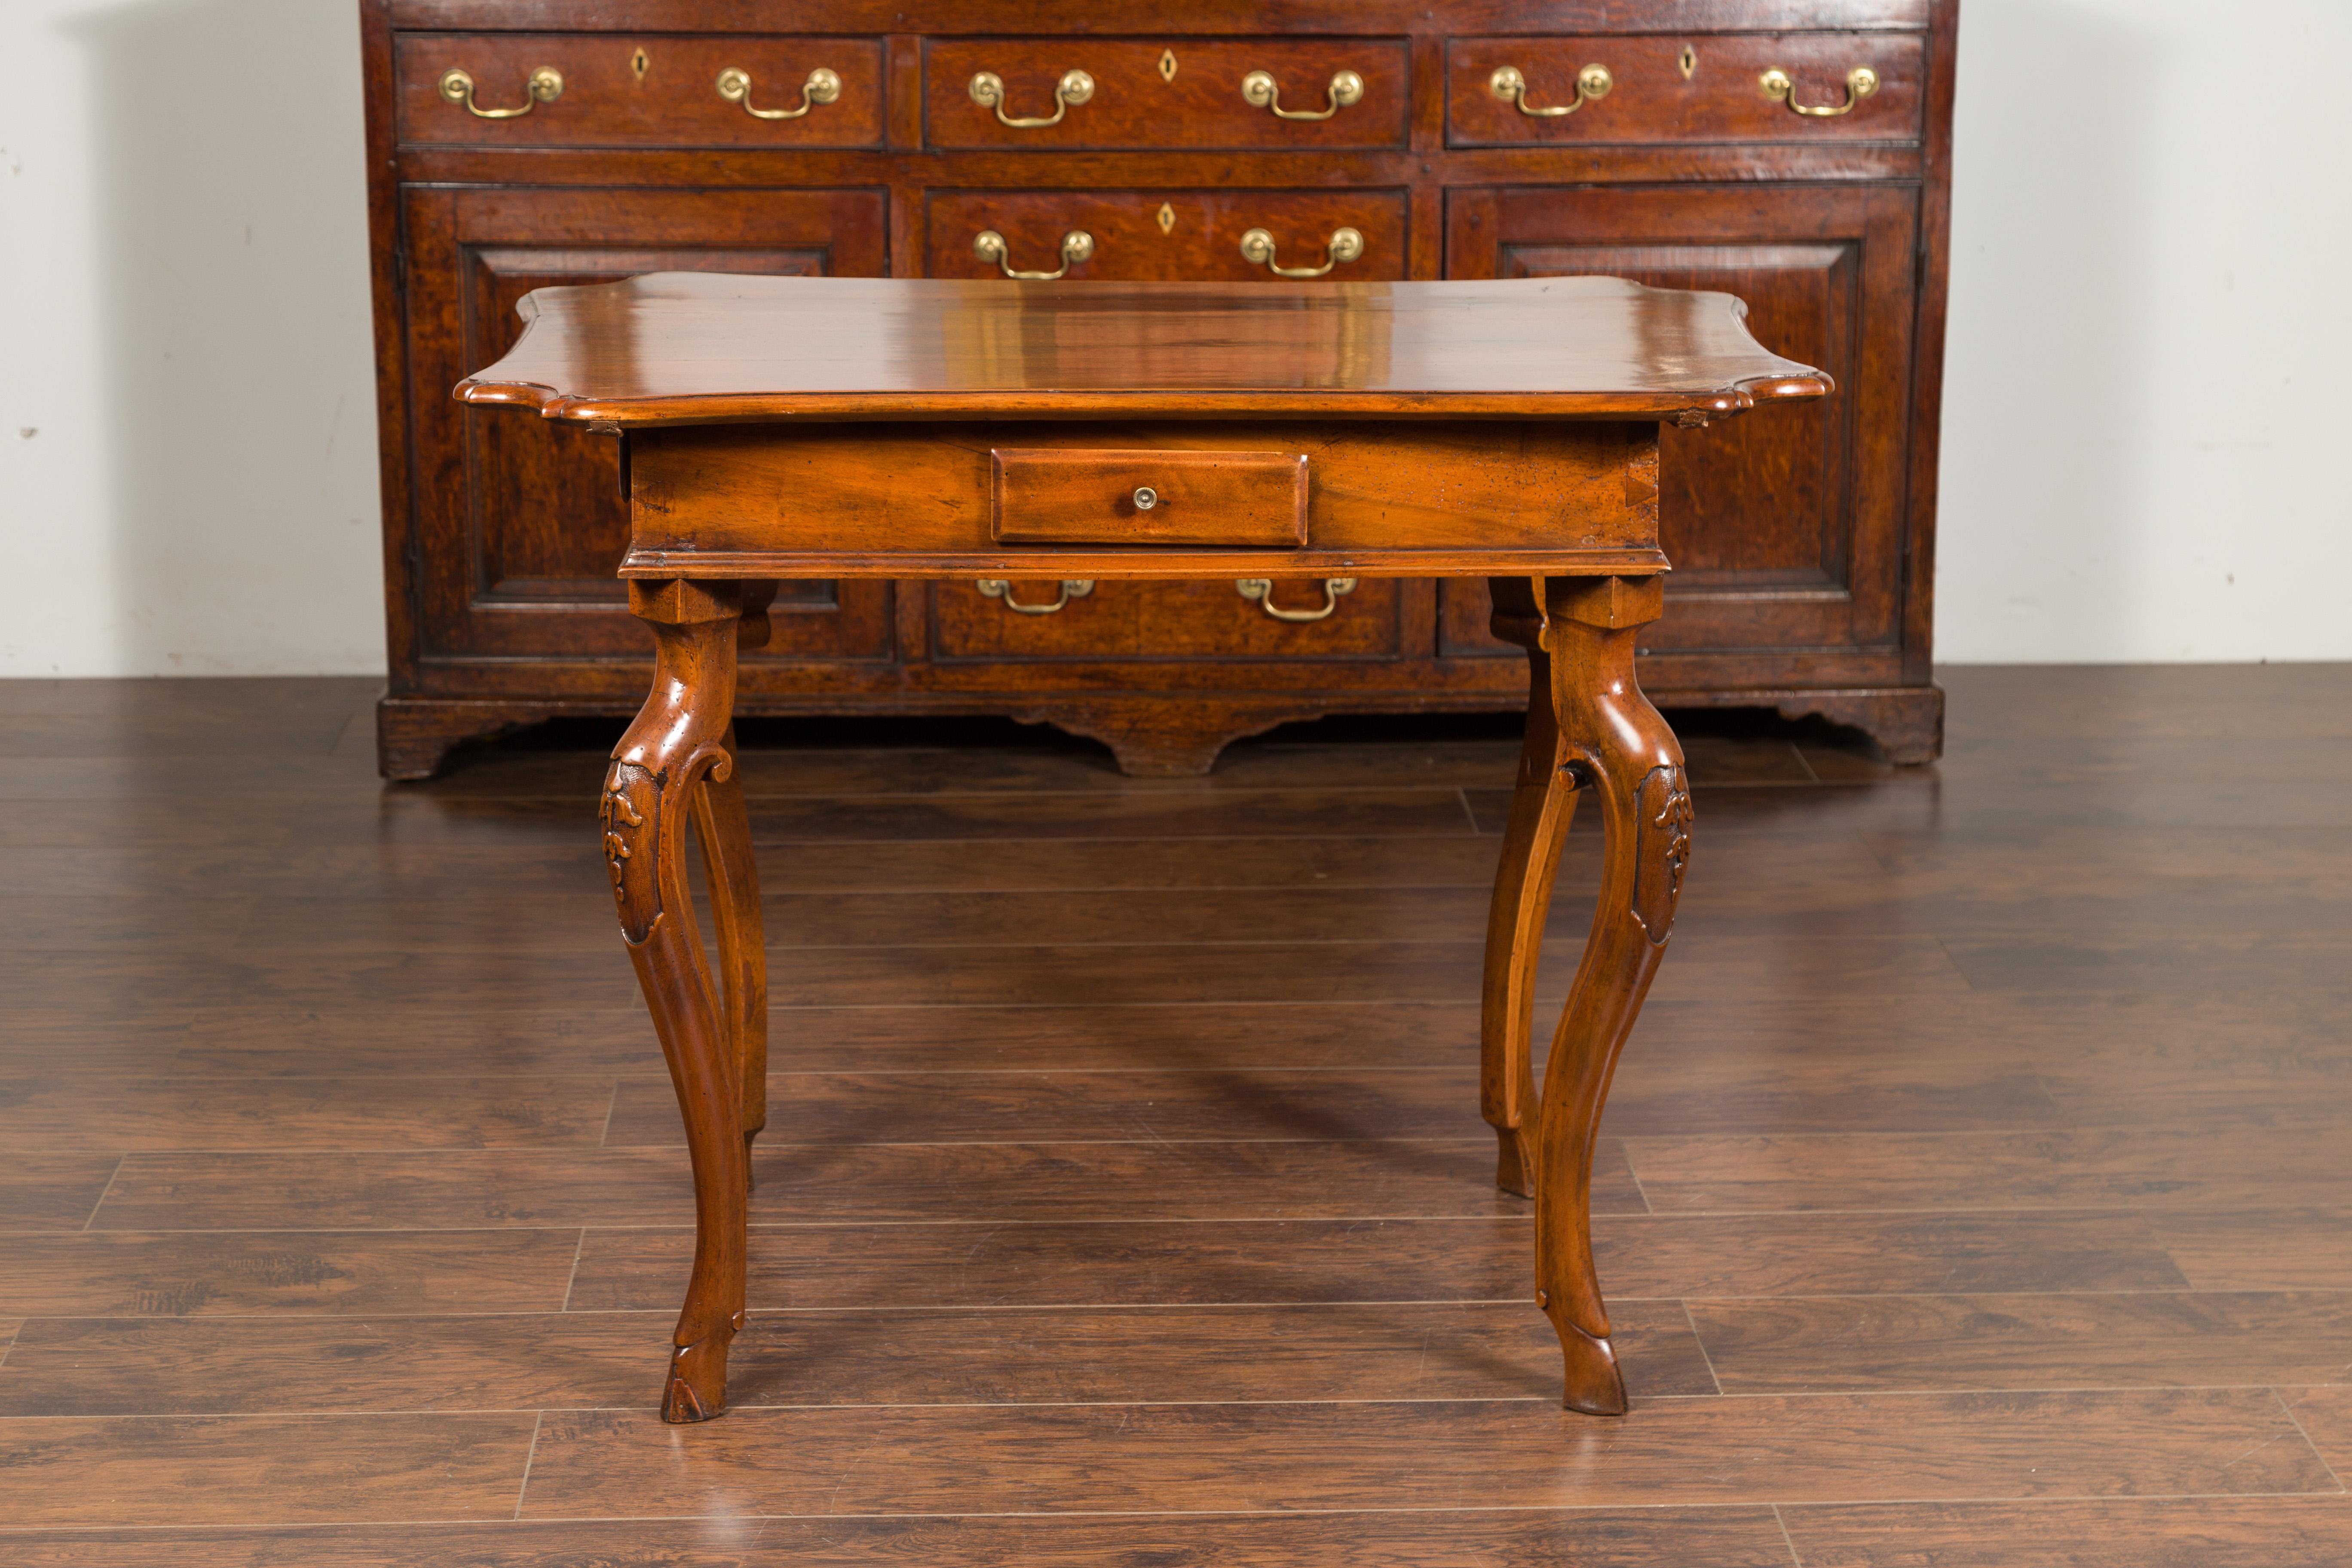 Northern Italian 1720s Régence Walnut Side Table with Four Drawers and Cabrioles 10